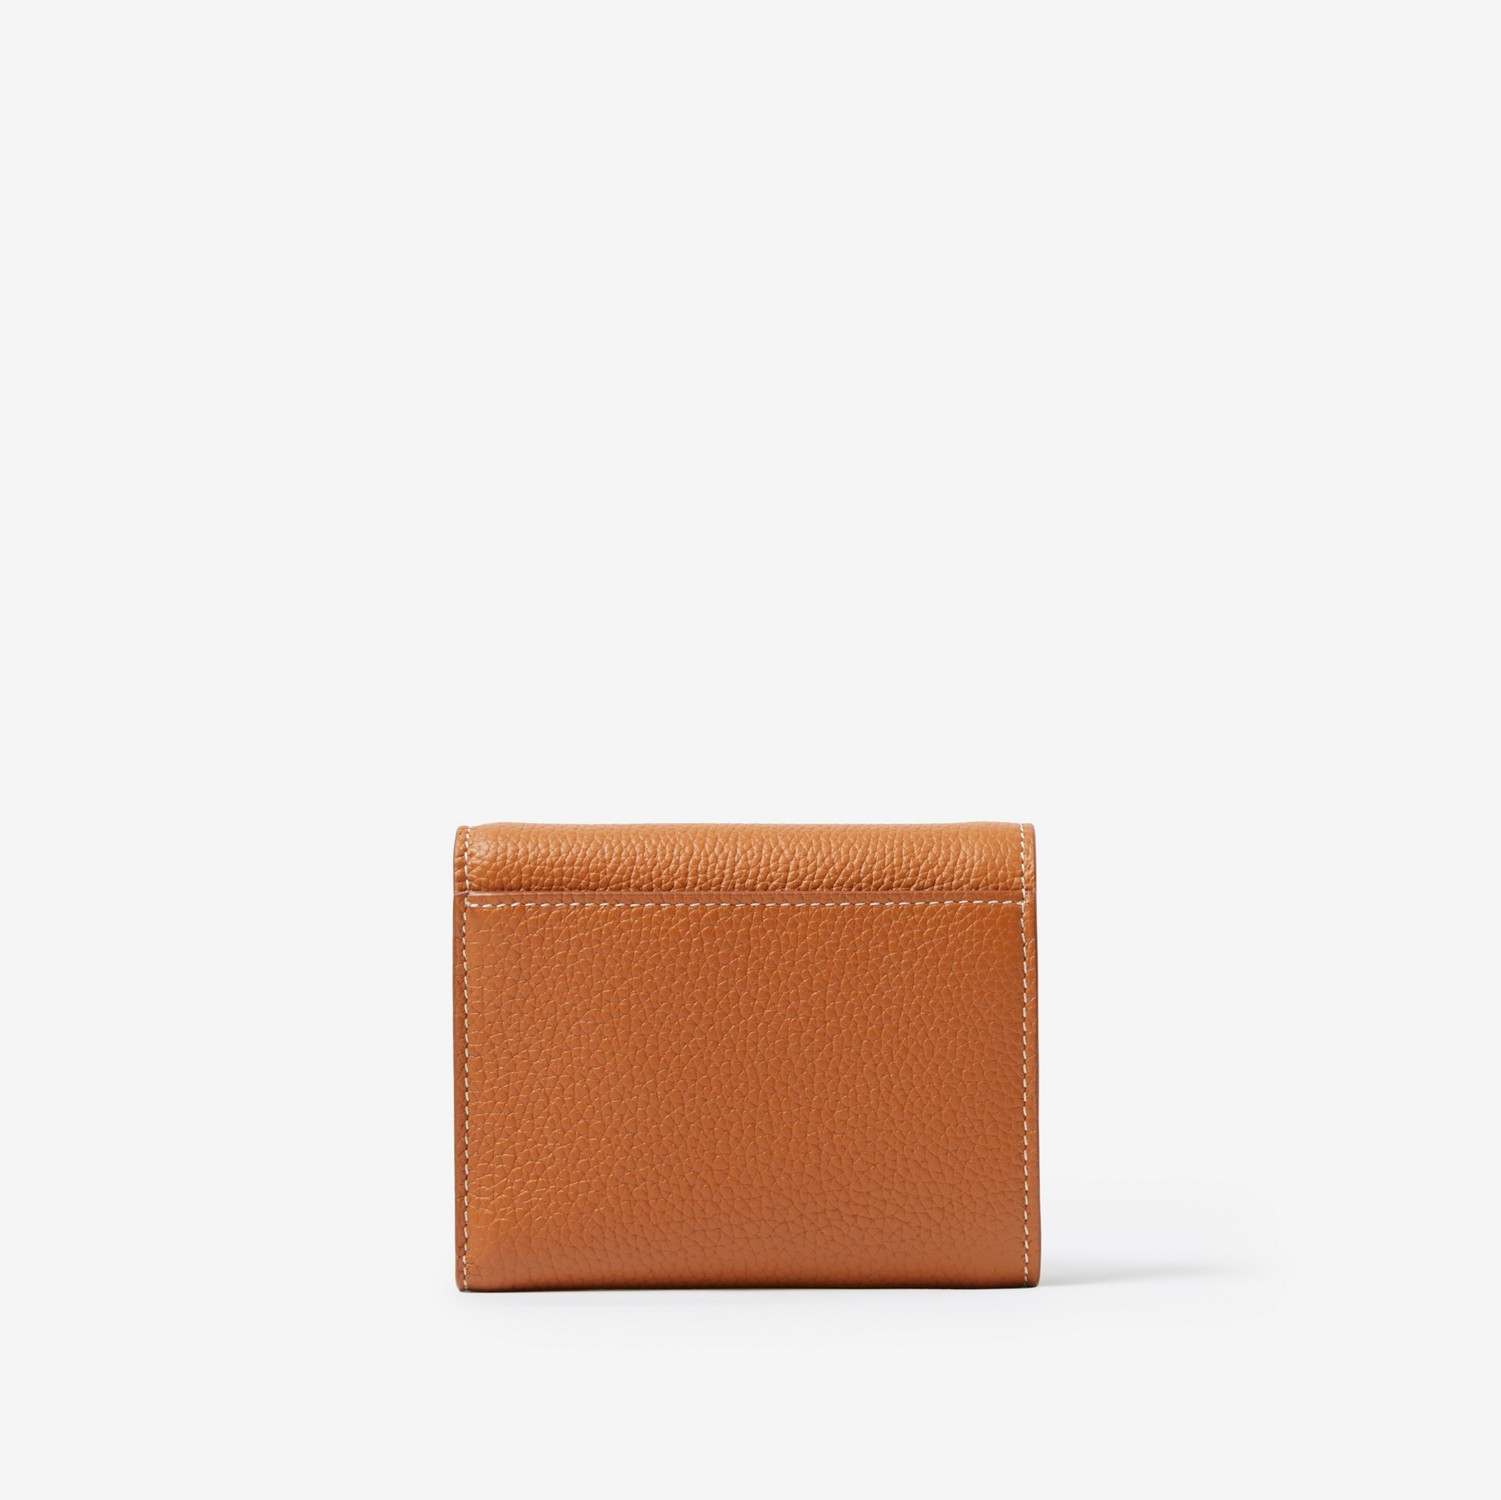 Grainy Leather TB Compact Wallet in Warm Russet Brown - Women | Burberry® Official